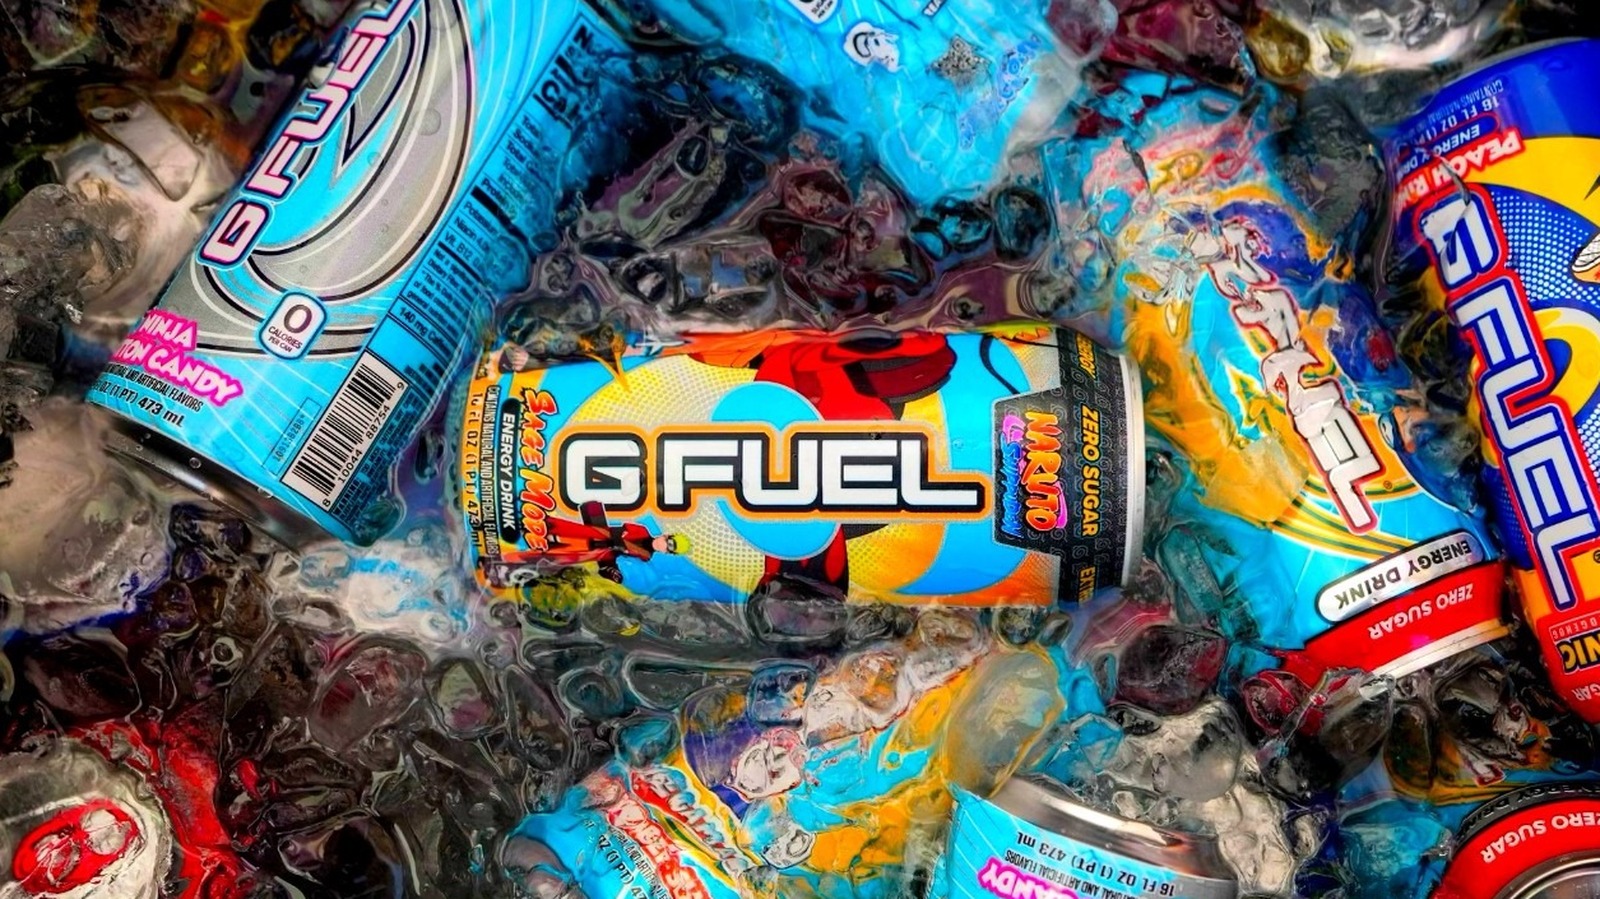 https://www.mashed.com/img/gallery/every-g-fuel-flavor-ranked-worst-to-best/l-intro-1665245298.jpg